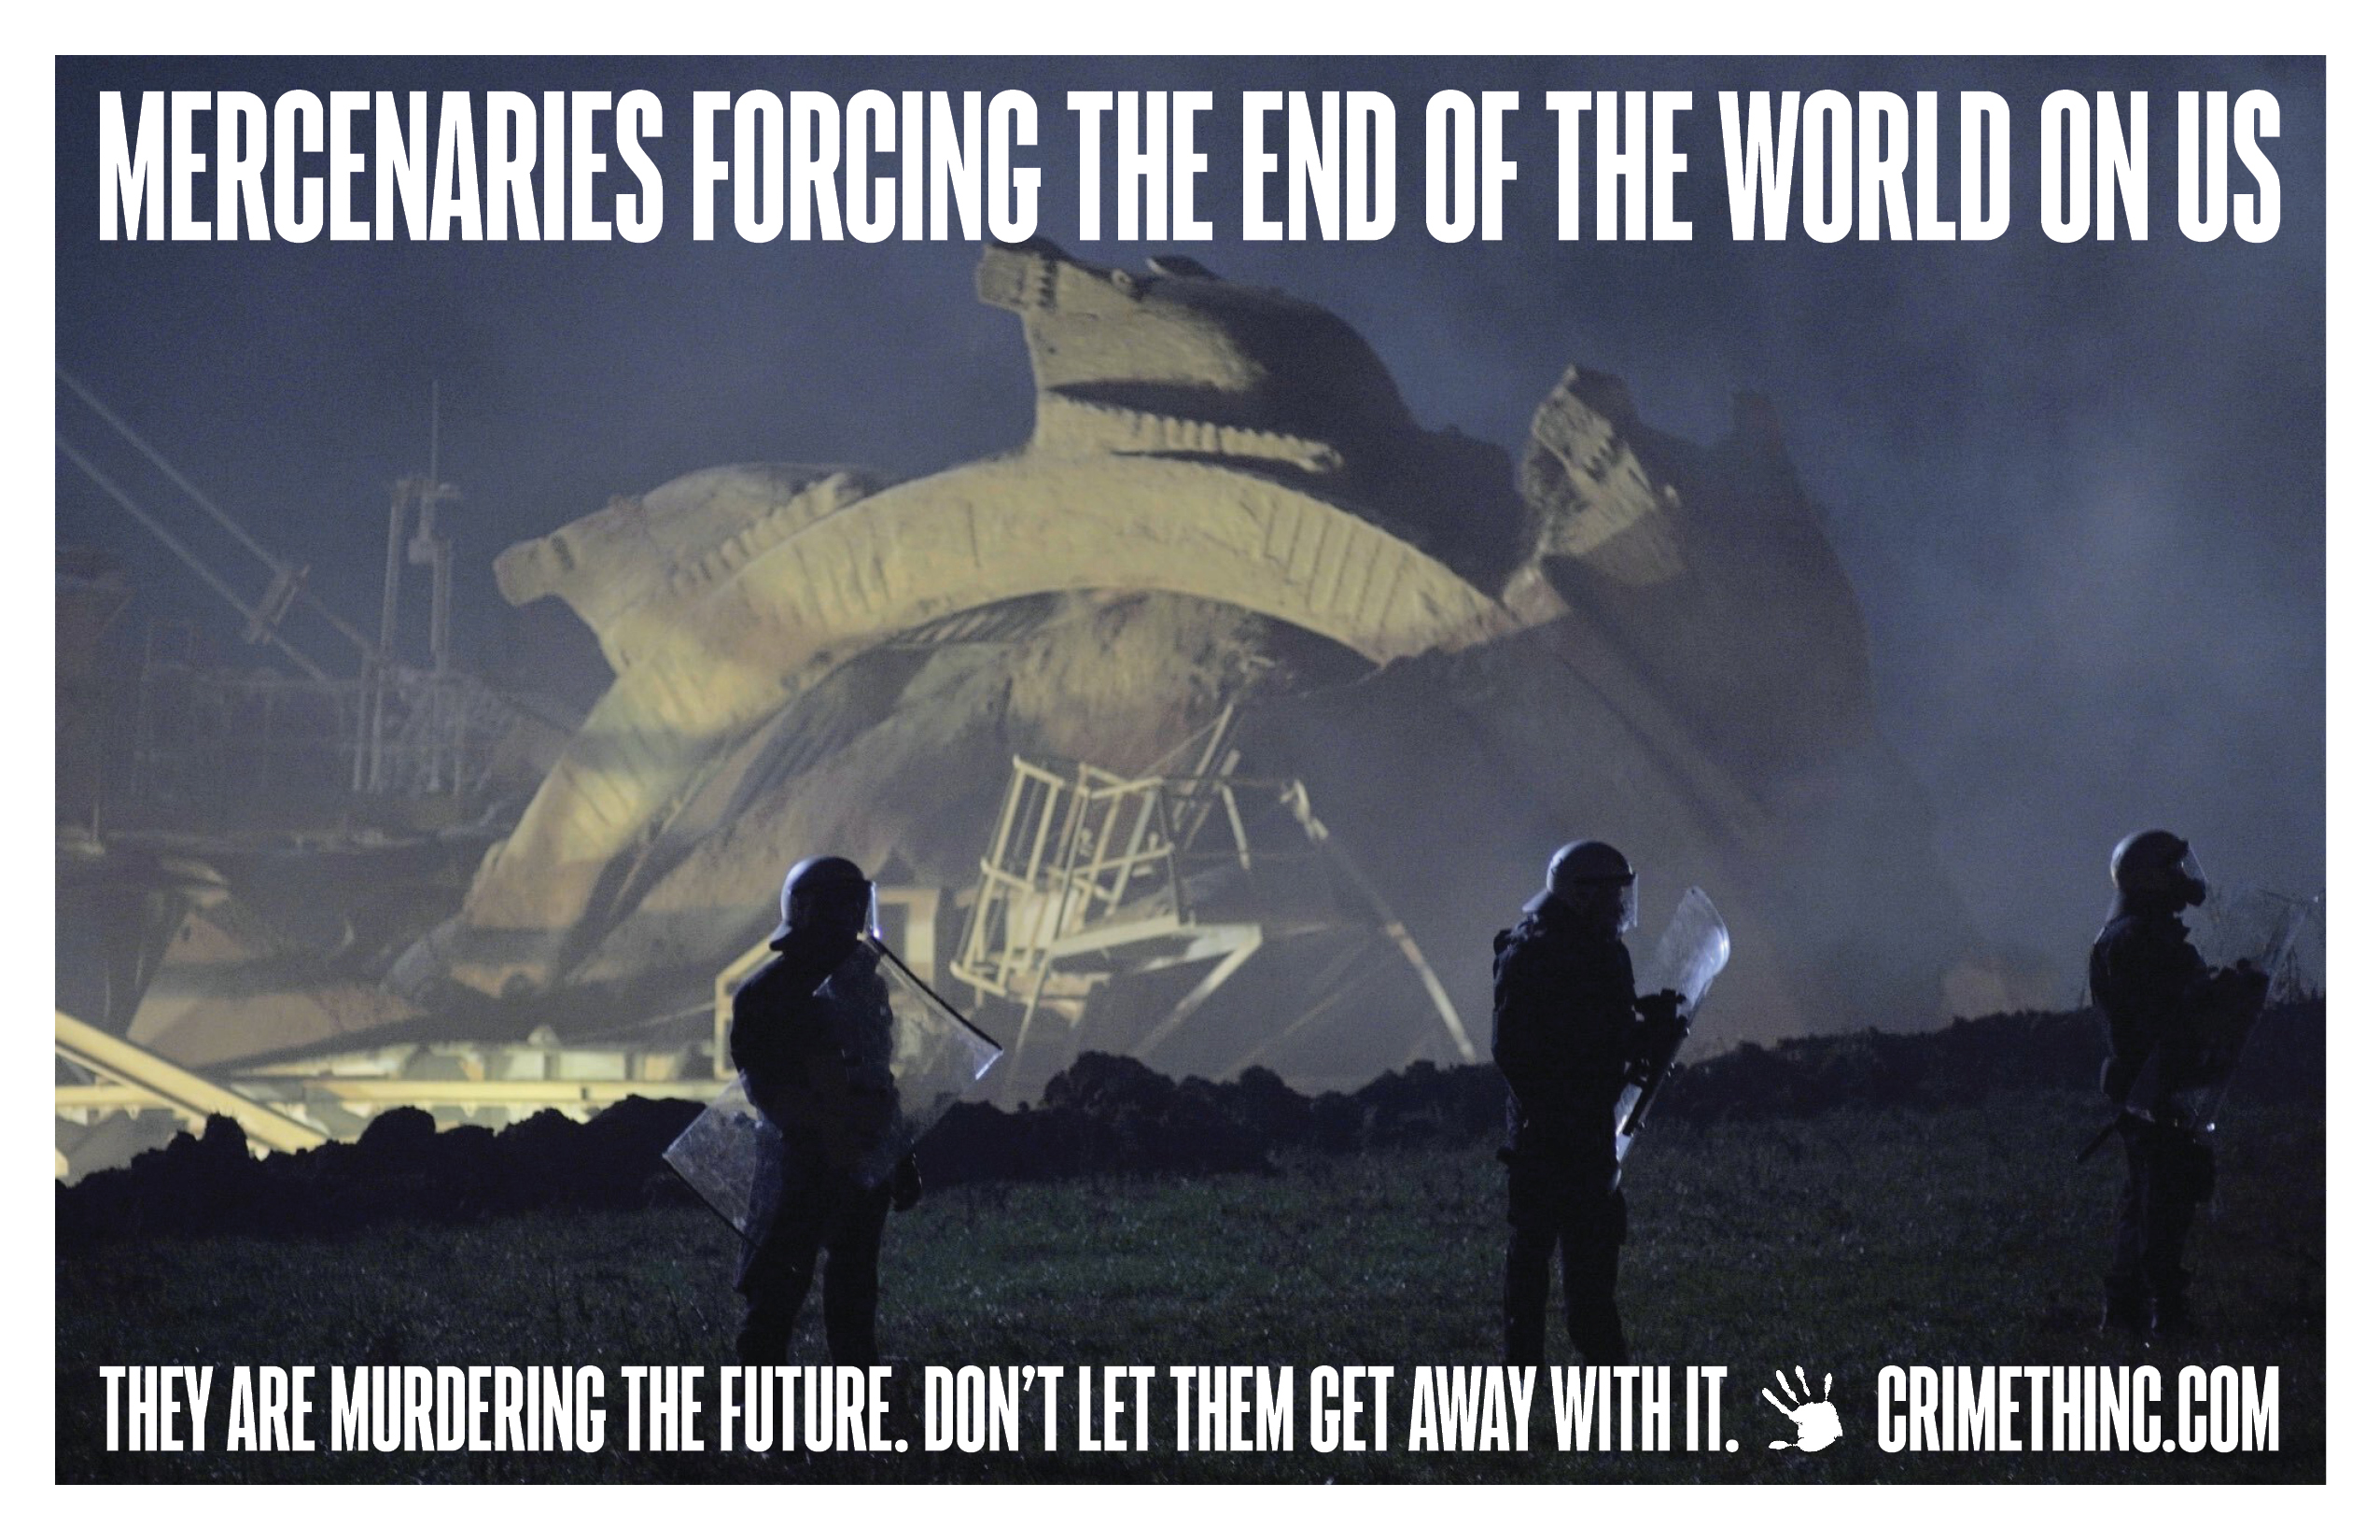 Foto di ‘Mercenaries Forcing the End of the World on Us’ fronte